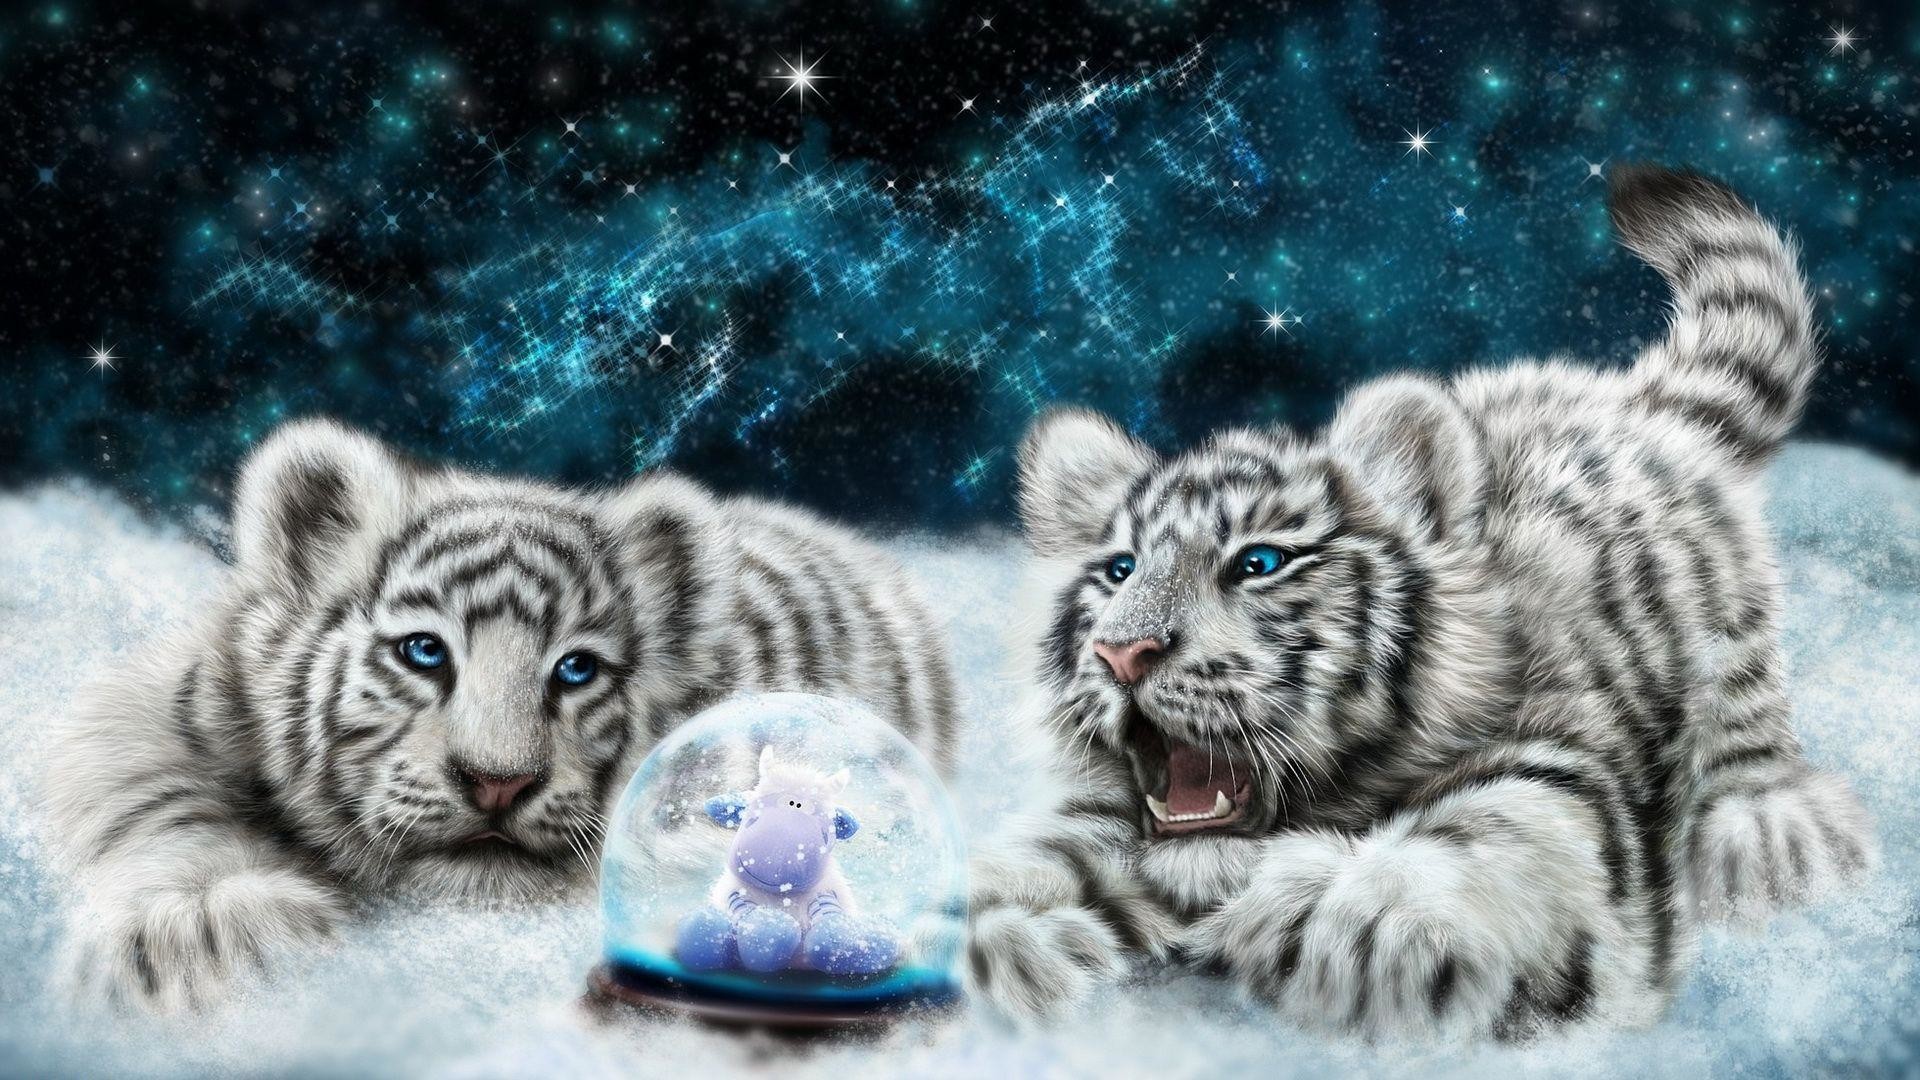 1920x1080 White tiger cubs looking at the snowglobe